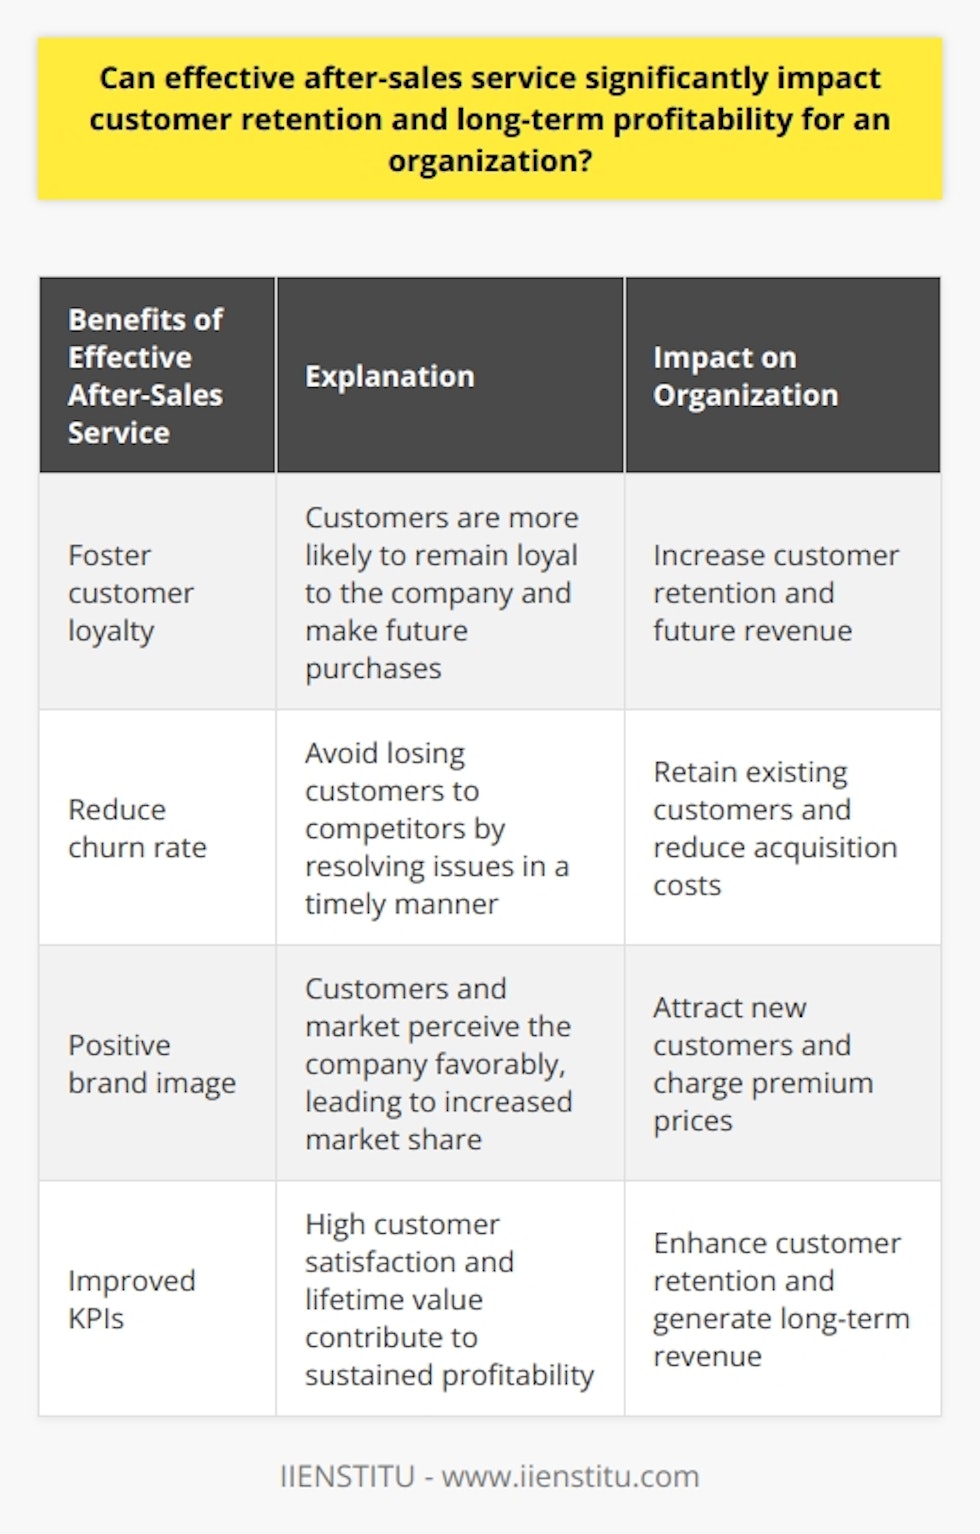 Can effective after-sales service significantly impact customer retention and long-term profitability for an organization?Absolutely, effective after-sales service can have a significant impact on customer retention and long-term profitability for an organization. After-sales service refers to the activities provided to customers after they have purchased a product, including installation, repair, and maintenance. By investing in a strong after-sales service program, businesses can enjoy numerous benefits that directly contribute to increased profitability.One major advantage of offering exceptional after-sales support is the ability to foster customer loyalty. When customers receive prompt and efficient assistance, they are more likely to remain loyal to the company and continue making future purchases. In addition, satisfied customers are more likely to recommend the business to others, which can lead to a growing customer base without the need for expensive marketing efforts.Providing high-quality after-sales service also helps to reduce the churn rate, which refers to the number of customers who stop doing business with a company. When customers encounter issues with a product or service, they may choose to switch to a competitor if their concerns are not addressed in a timely and satisfactory manner. By ensuring that customer issues are resolved effectively, organizations can retain their customers and avoid losing them to competitors. Retaining existing customers is typically more cost-effective than acquiring new ones, making it an important factor for long-term profitability.Moreover, an organization that excels in after-sales support will develop a positive brand image. Customers and the market in general perceive companies offering excellent after-sales service favorably. This positive reputation can attract new customers, leading to increased market share and improved profitability. Furthermore, a positive brand image can enhance the perceived value of a company's products and services, allowing the business to charge premium prices and generate higher profits.Implementing effective after-sales service can also lead to improvements in key performance indicators (KPIs) such as customer satisfaction and lifetime value. This means that high levels of customer satisfaction often correlate with increased customer retention and word-of-mouth marketing. With a high lifetime value, customers are likely to continue purchasing from the organization over an extended period, contributing to sustained profitability.In conclusion, prioritizing efficient and effective after-sales service is crucial for organizations looking to enhance customer retention and long-term profitability. By fostering customer loyalty, reducing the churn rate, developing a positive brand image, and improving key performance indicators, businesses can achieve sustainable growth and profitability. Therefore, including after-sales service as an integral part of an organization's strategy is essential for success.